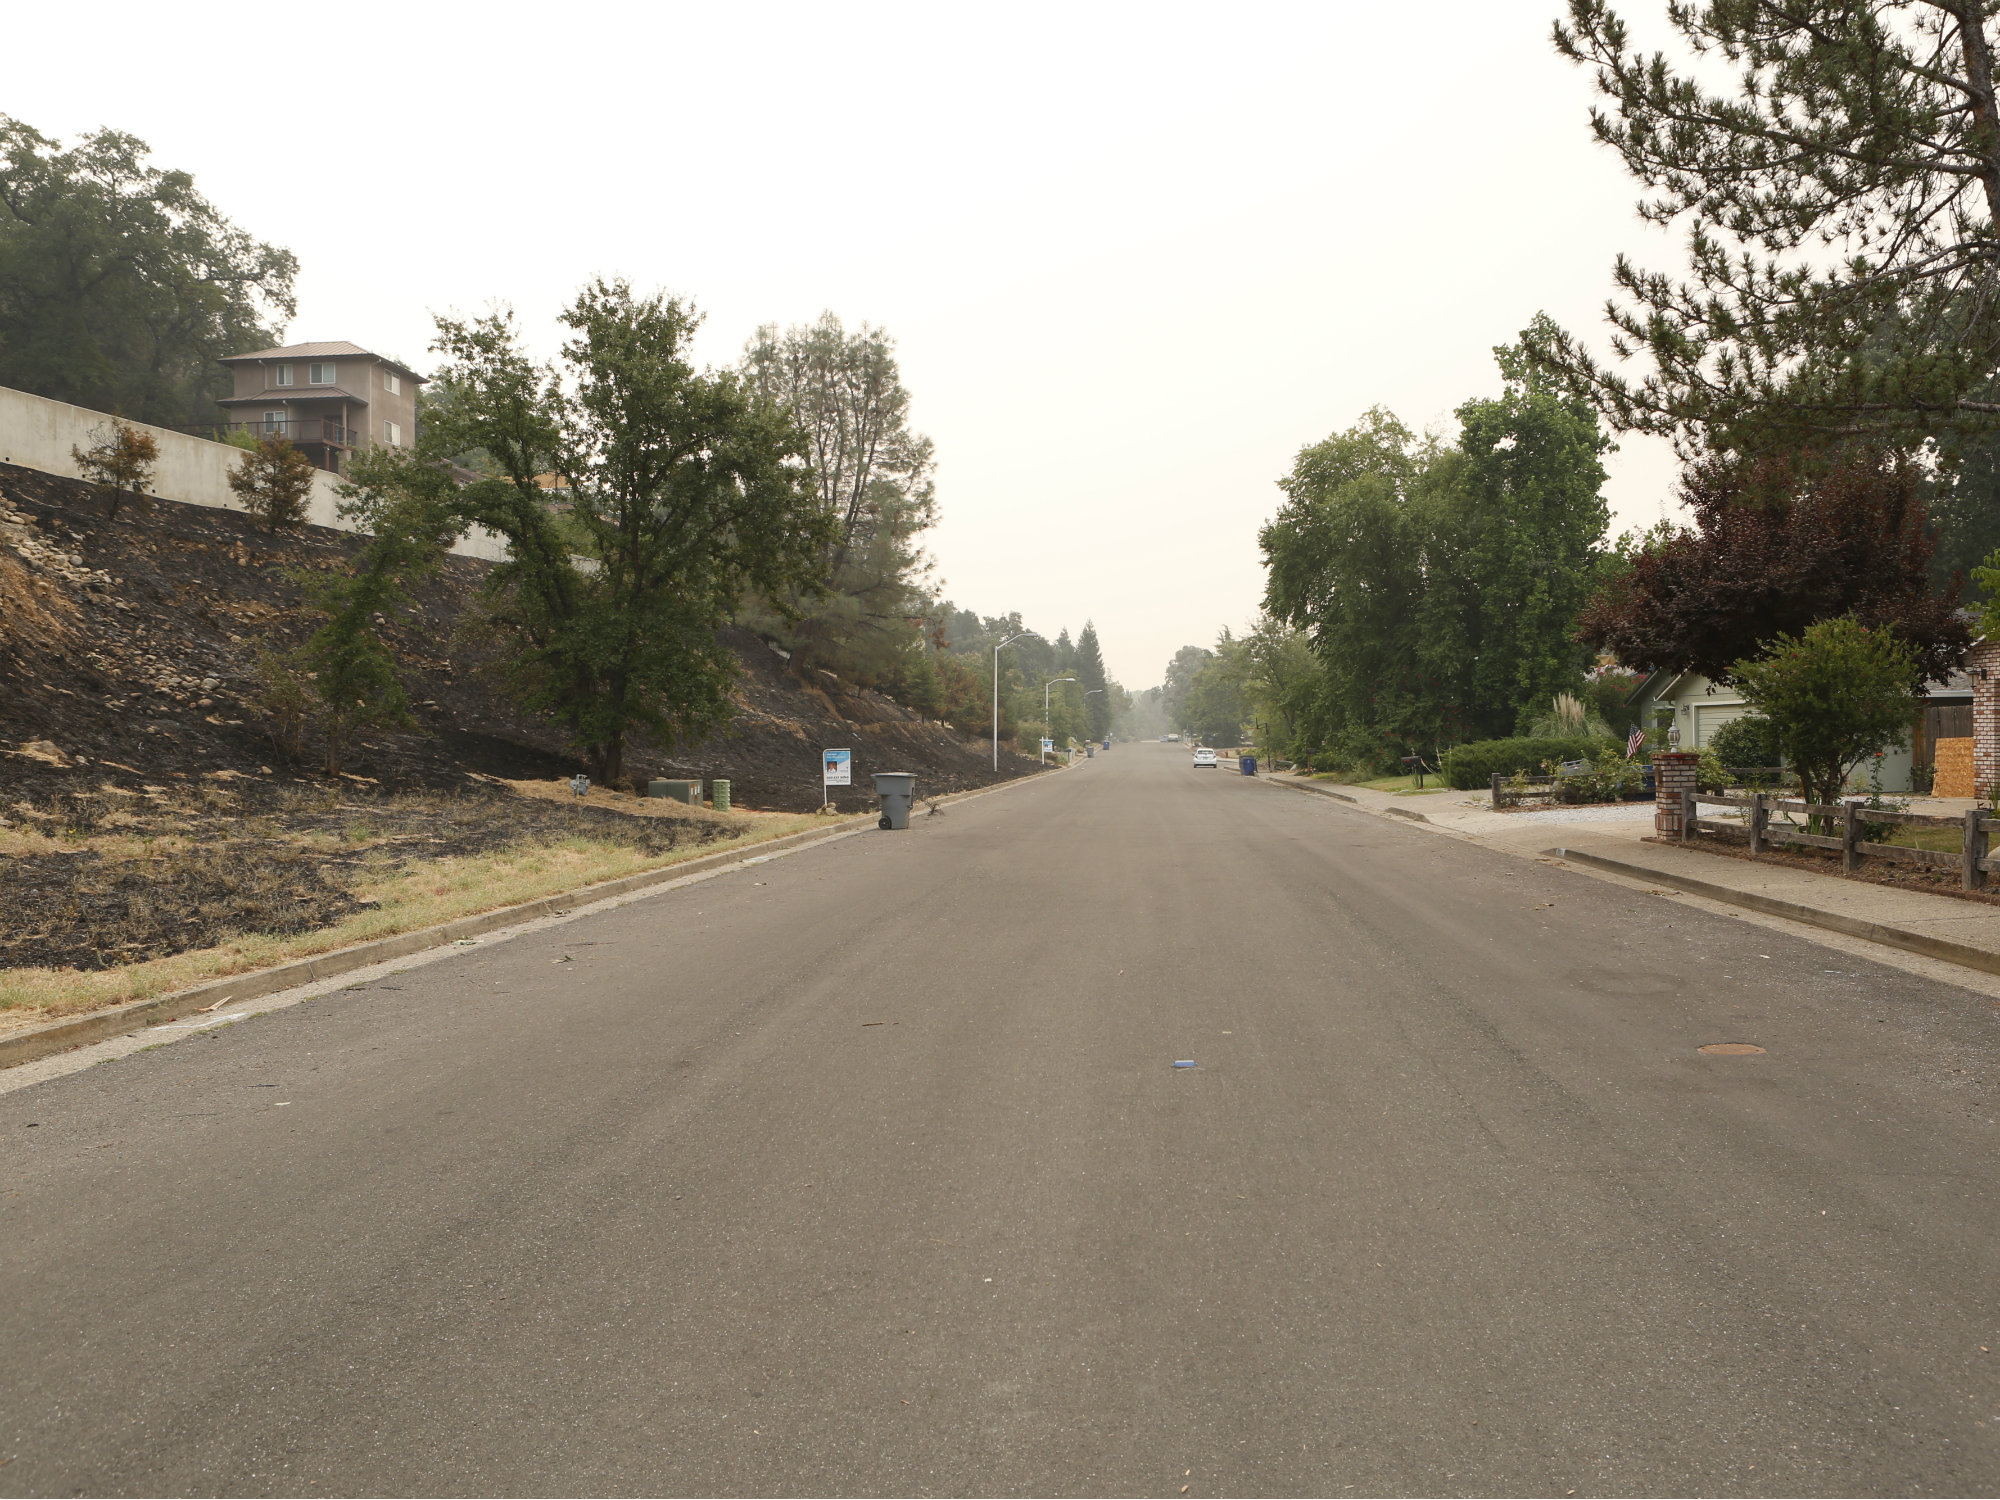 072818Carr Fire Streets 1-BJ-p